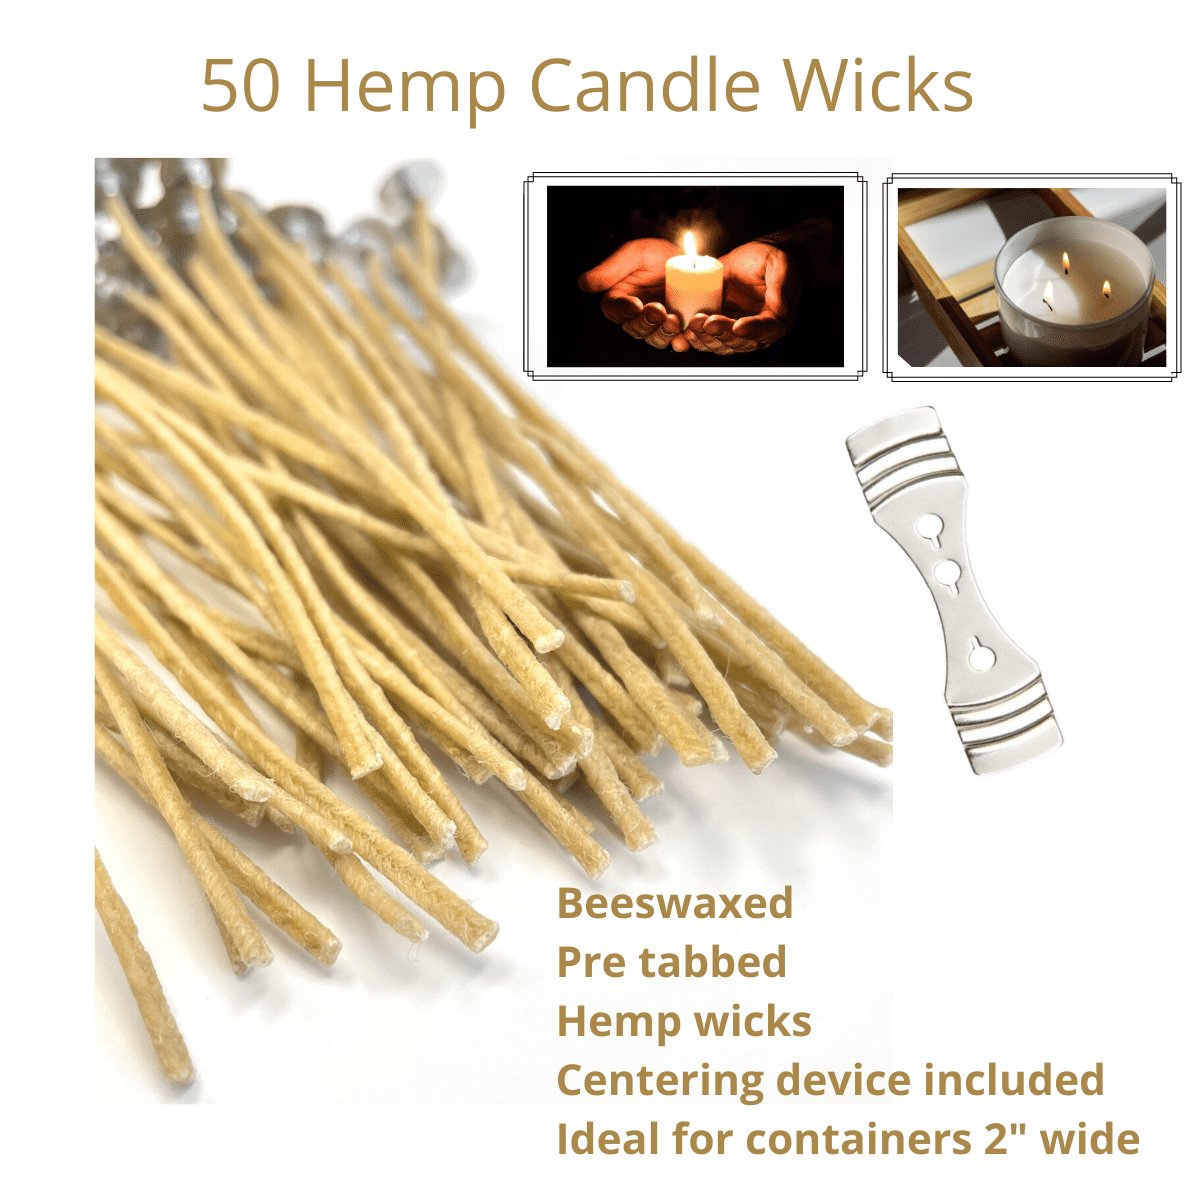  100 PCS 8 inch Hemp Candle Wicks kit, 2.5mm Beeswax Candle Wicks  for DIY Bulk Natural Candle Wicks for Beeswax Candle Making Hemp Edible  Candle Wick for Butter Candle